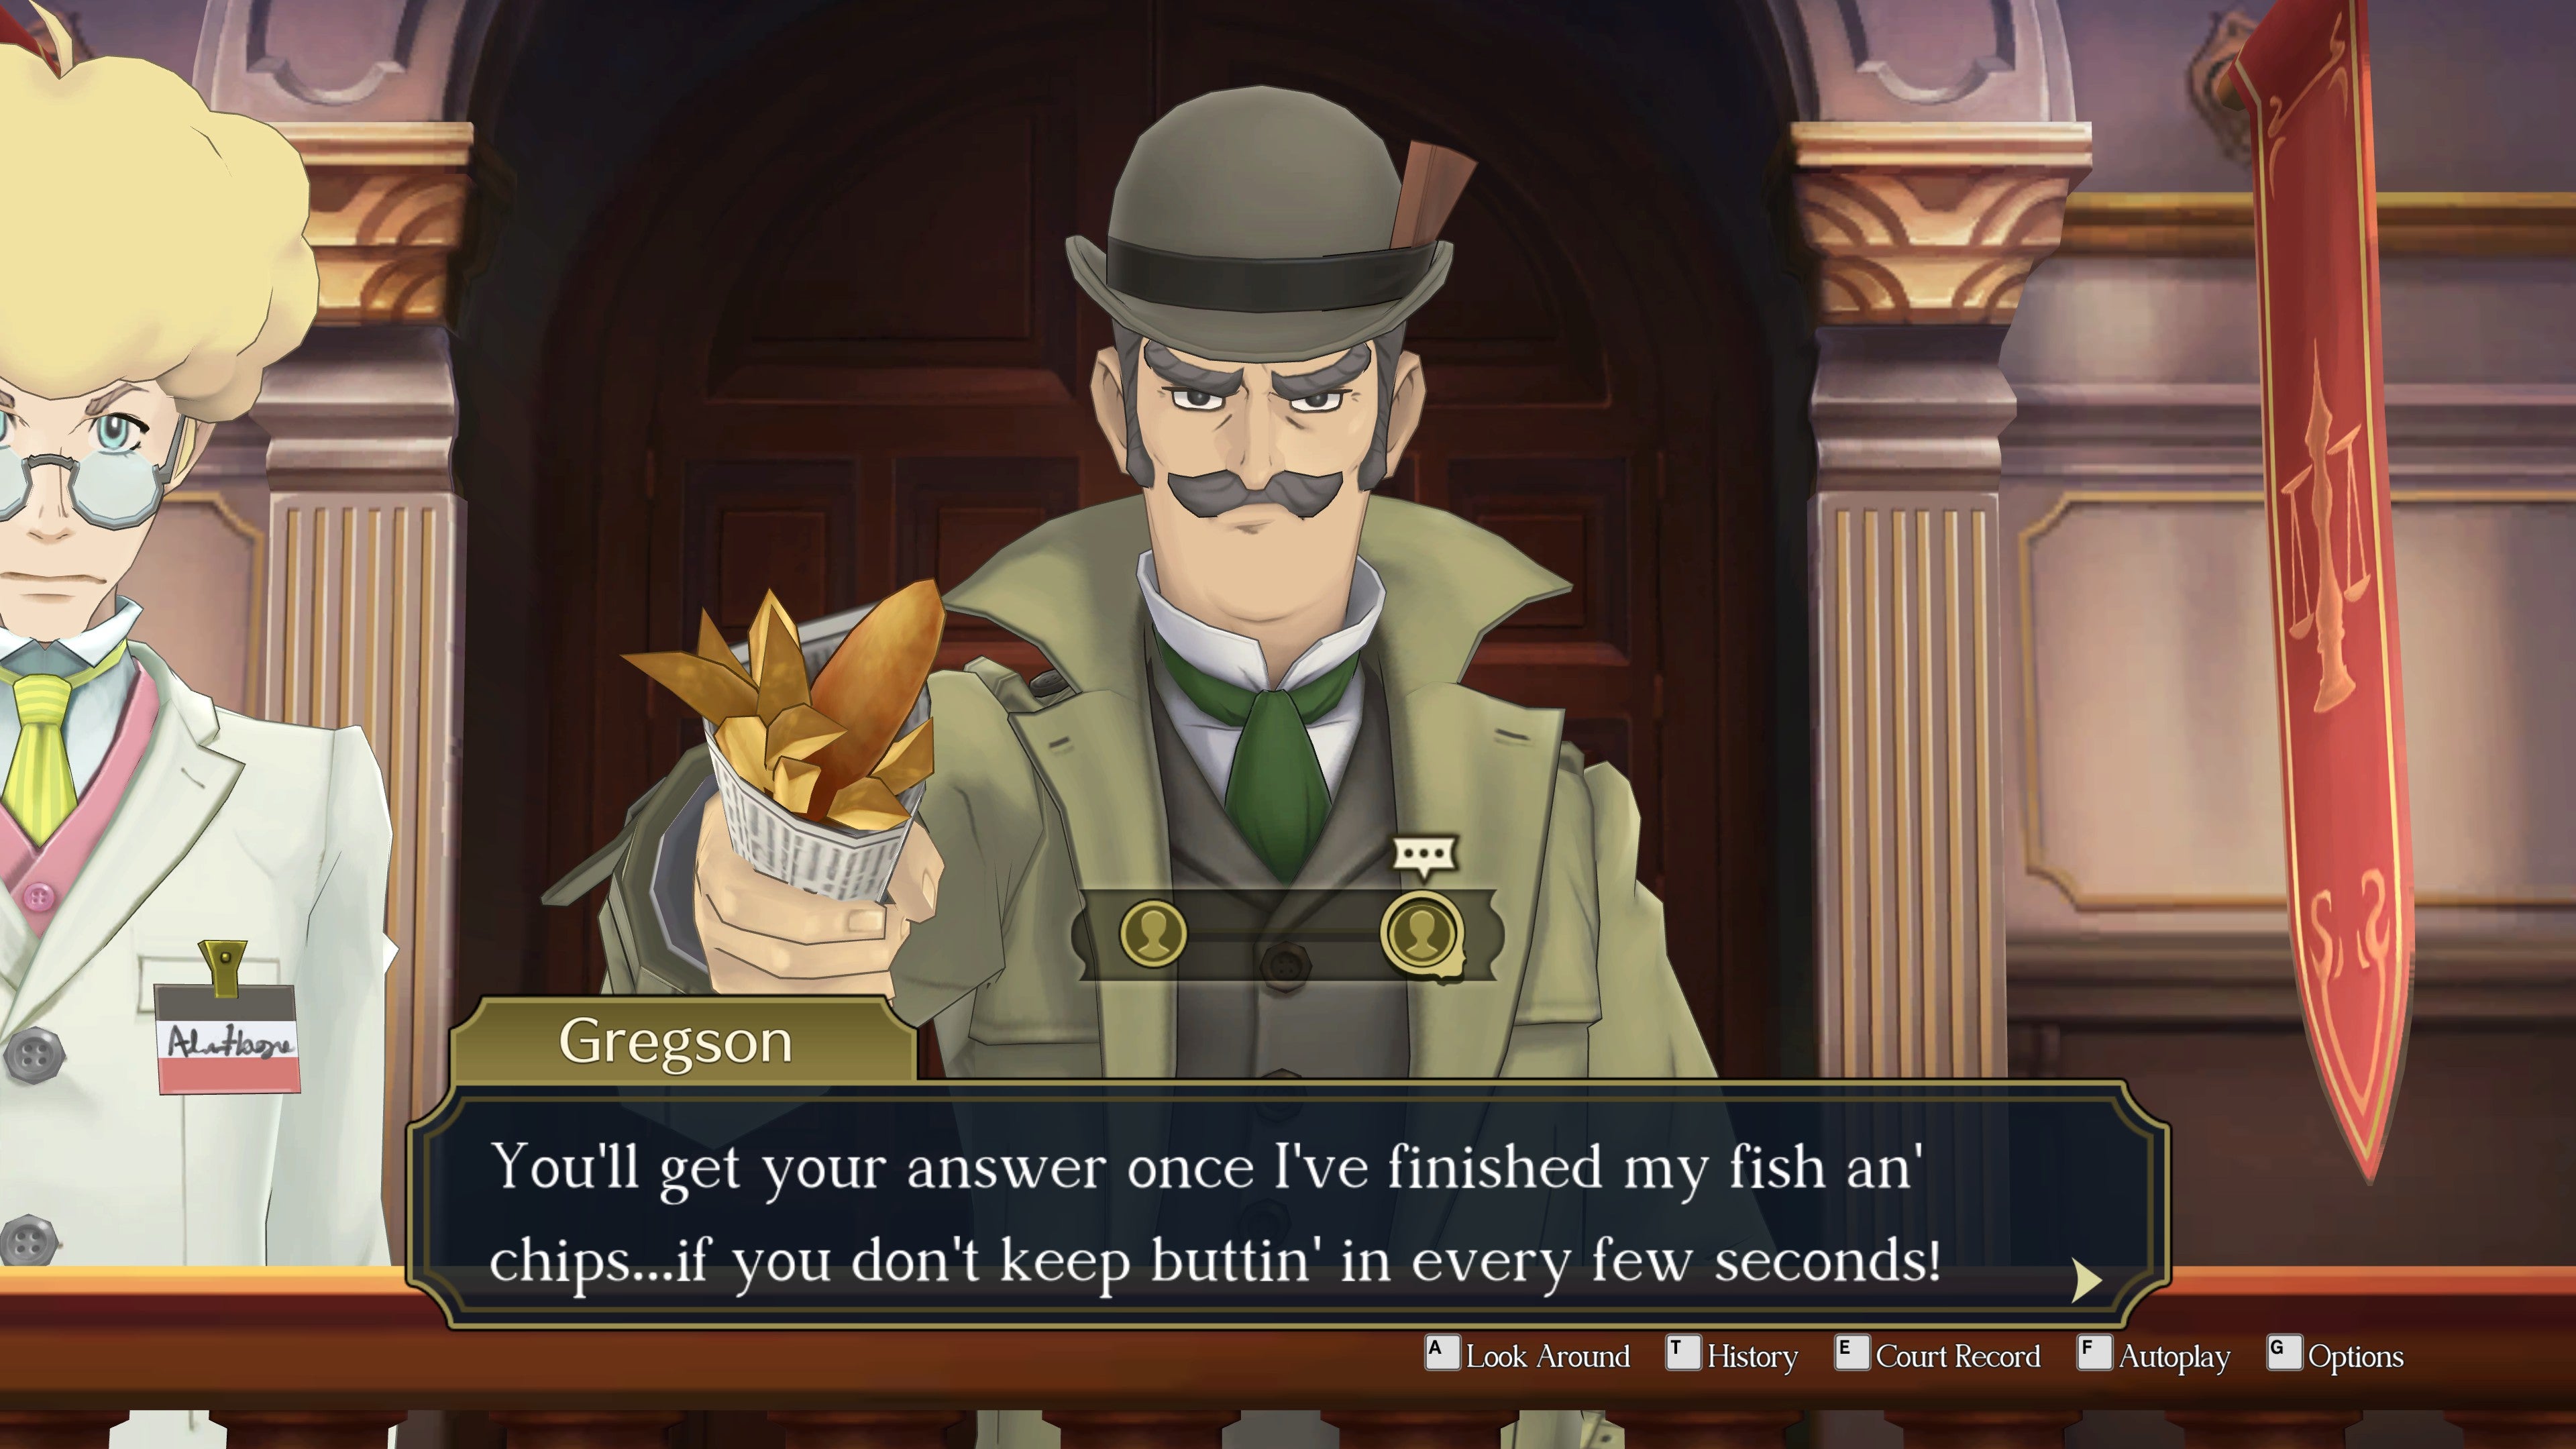 Inspector Gregson takes the stand in The Great Ace Attorney Chronicles